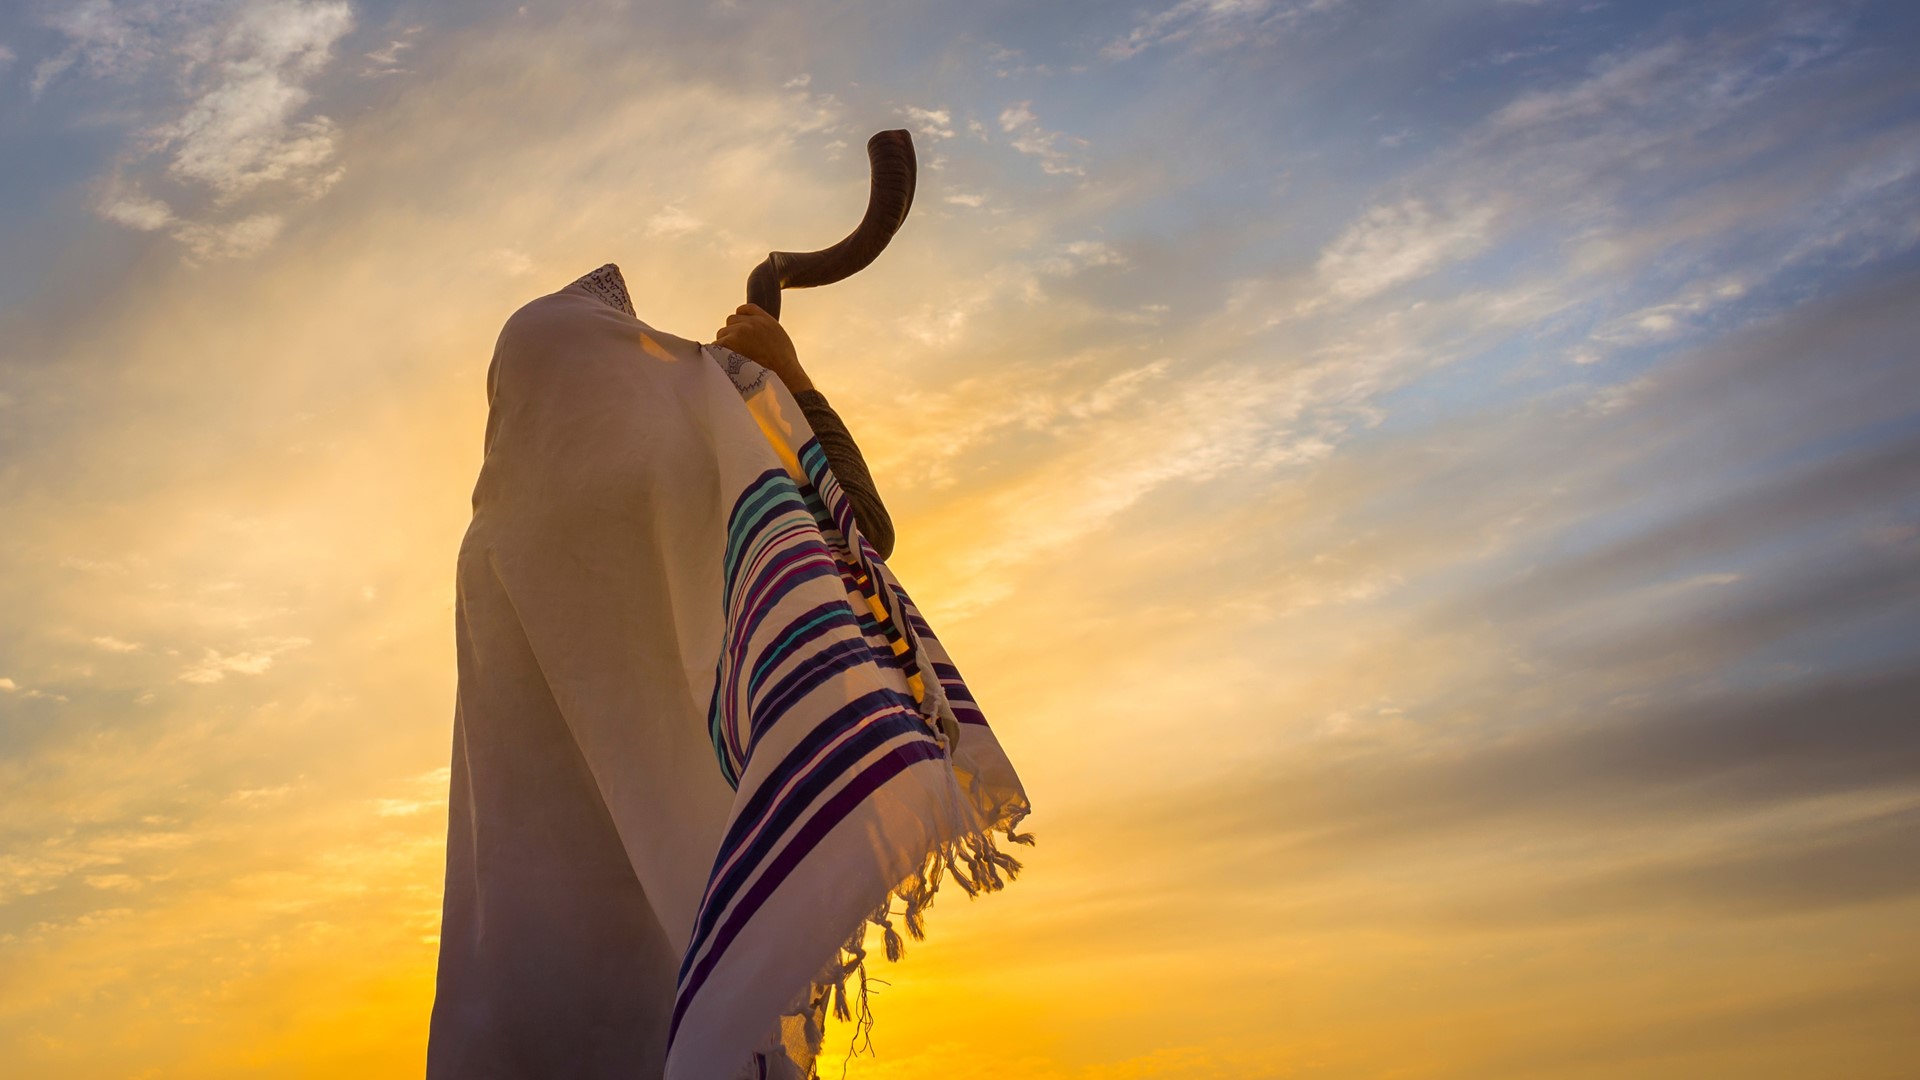 Rosh Hashanah, also known as the Jewish New Year, is one of Judaism’s holiest days. It begins on the first day of Tishrei, the seventh month of the Hebrew calendar.